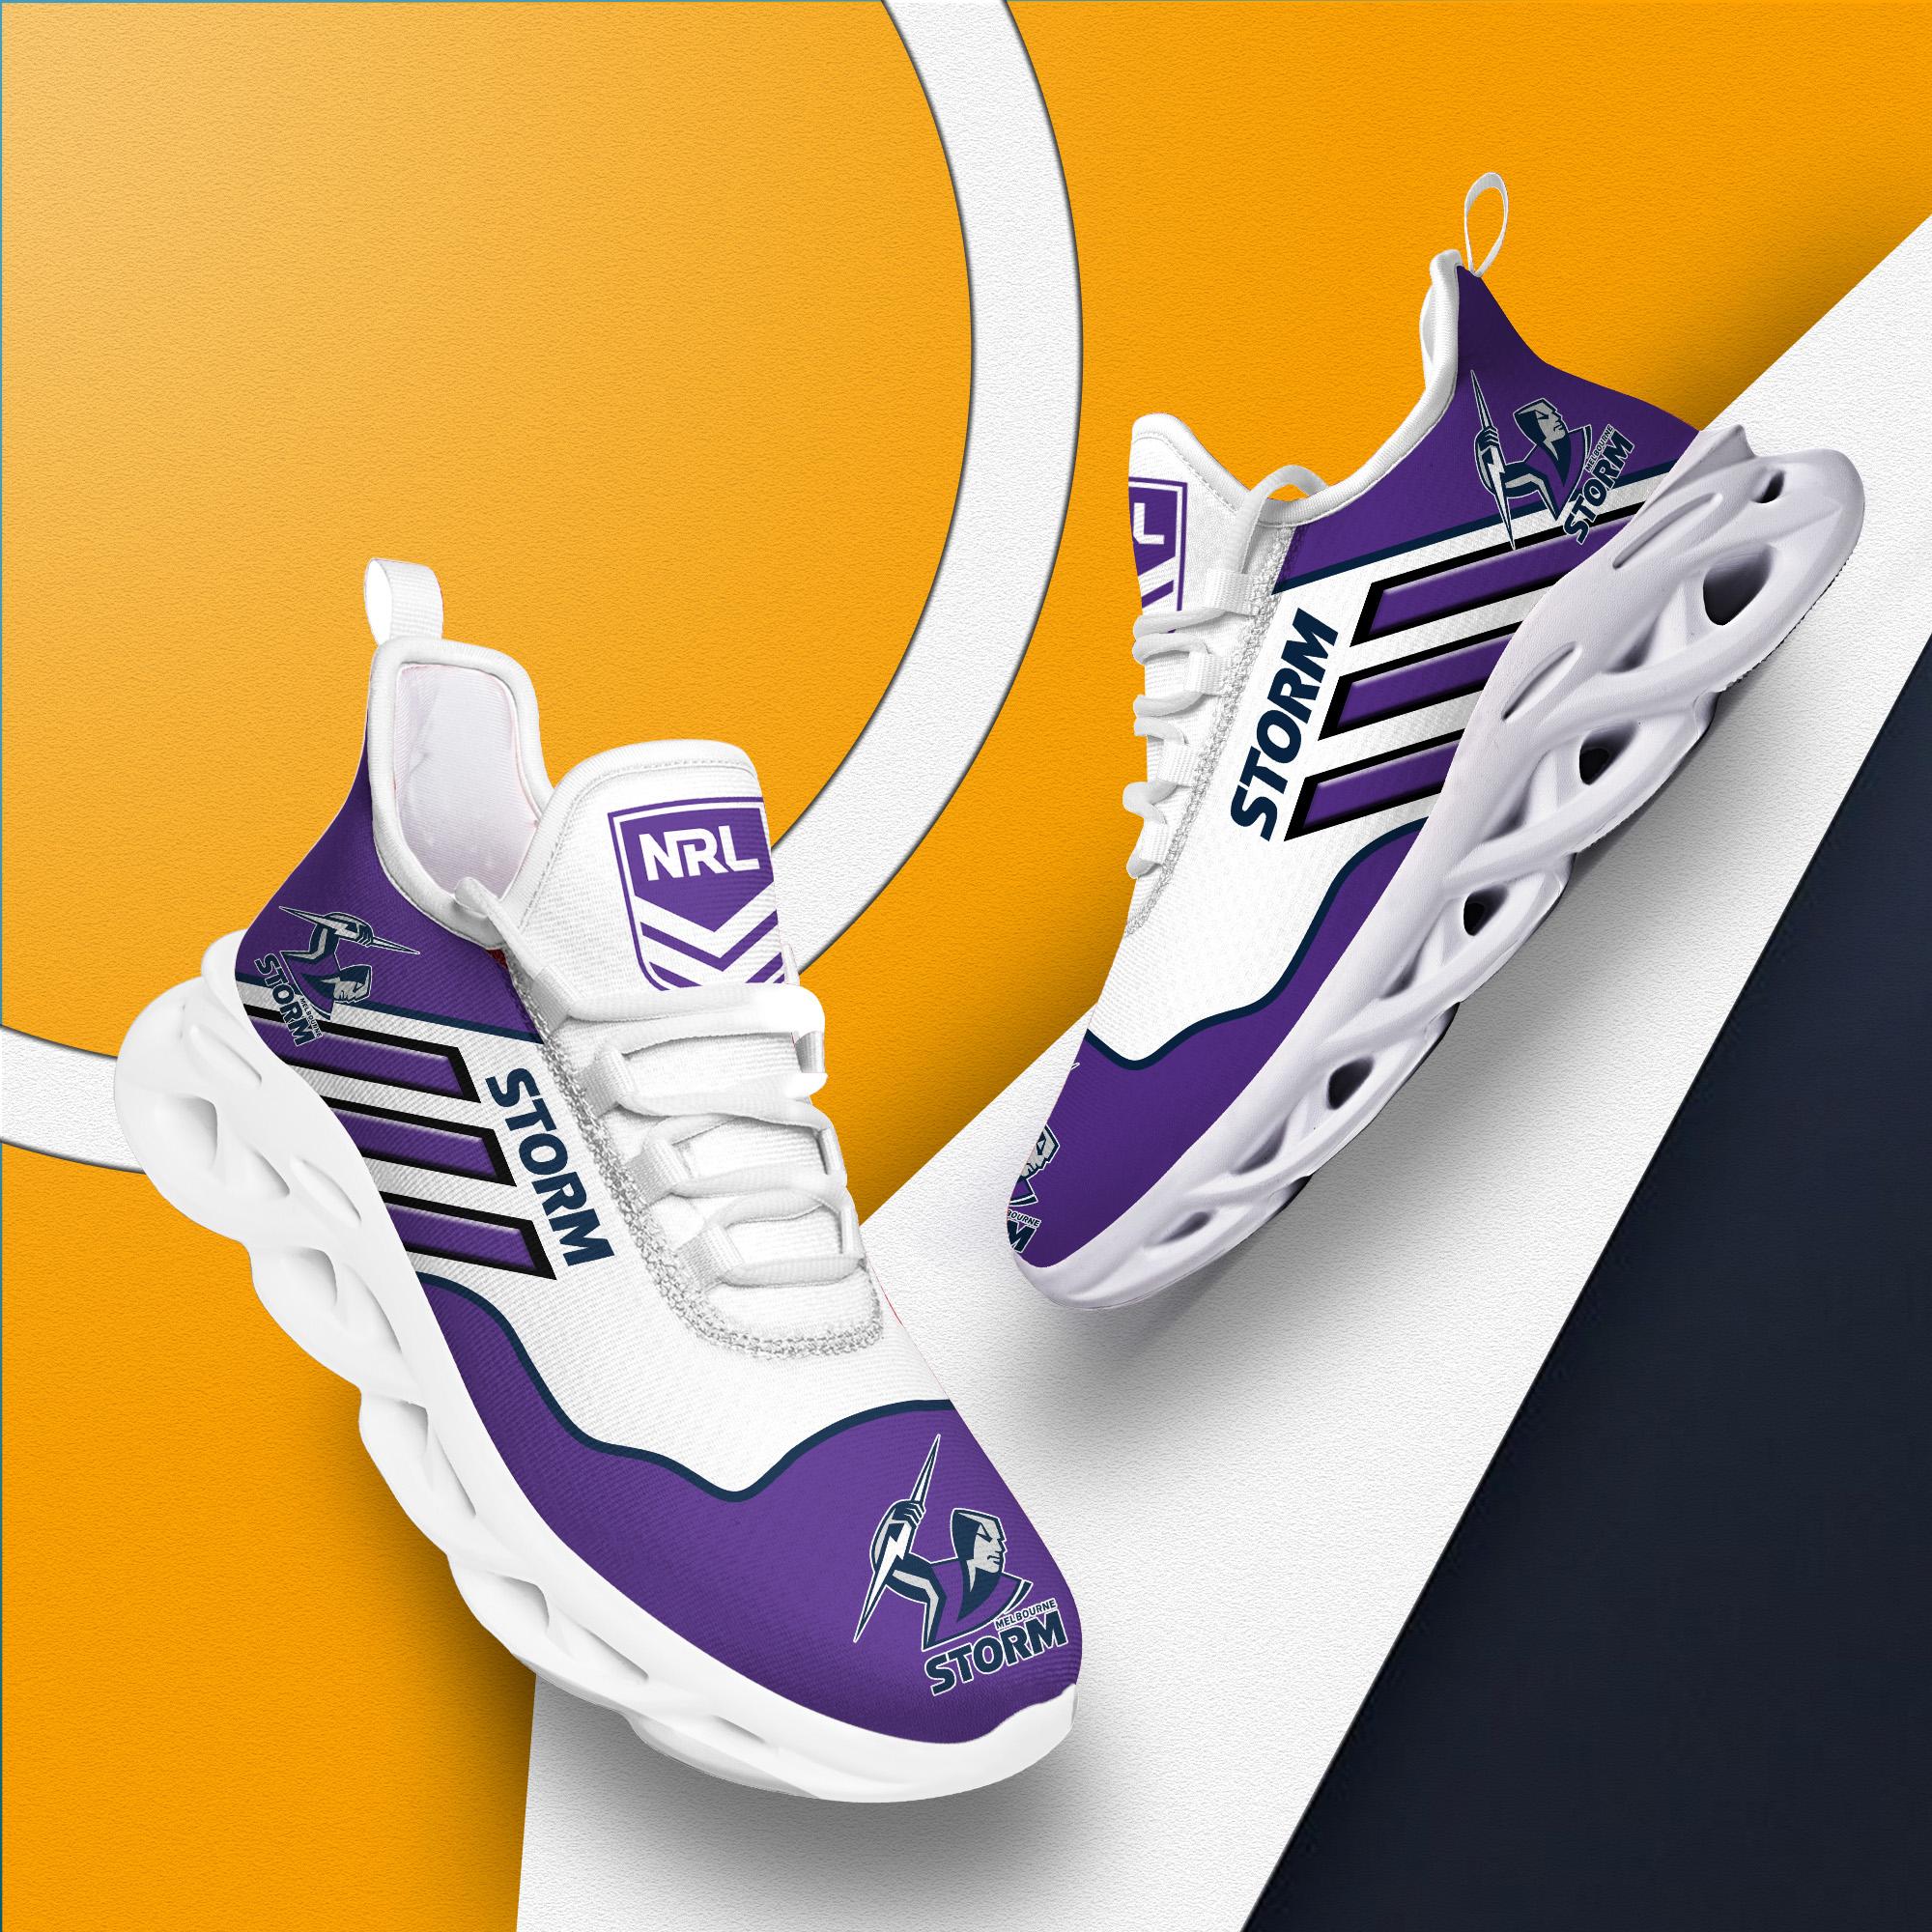 Melbourne Storm NRL Clunky Max Soul Shoes